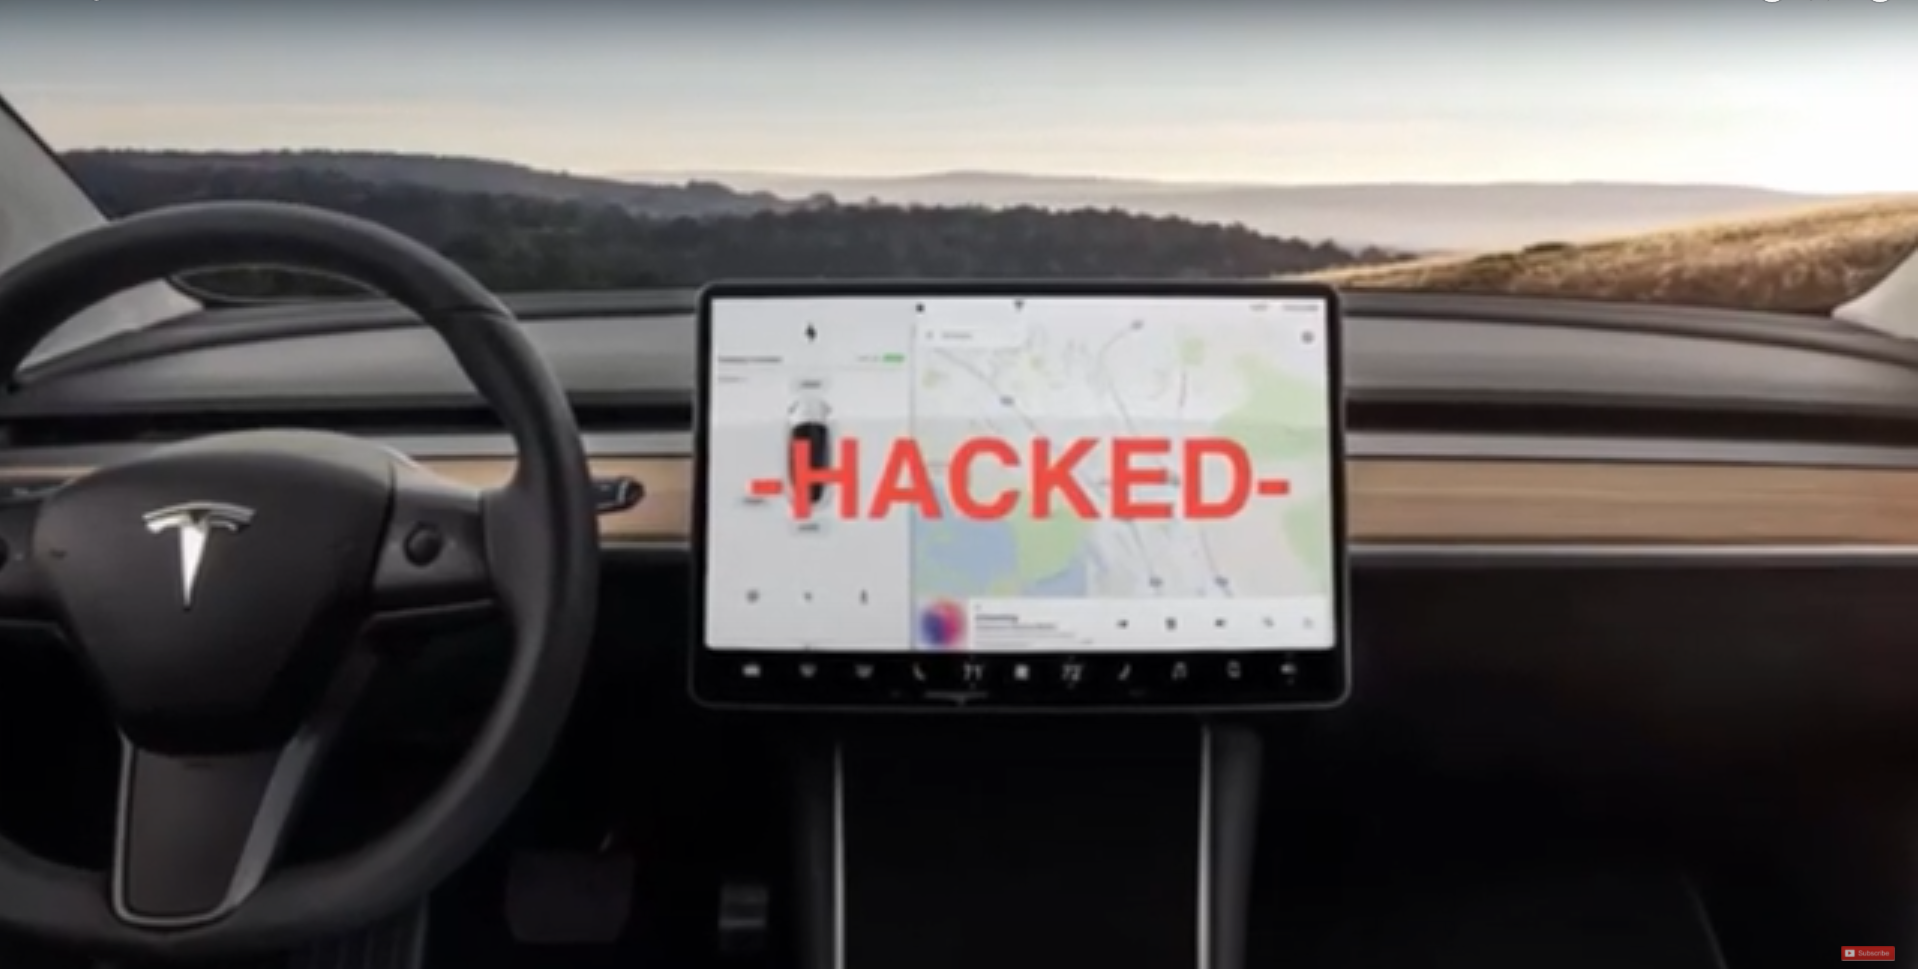 Teenager Hacker takes control of more than 20 Tesla vehicles in 10 countries